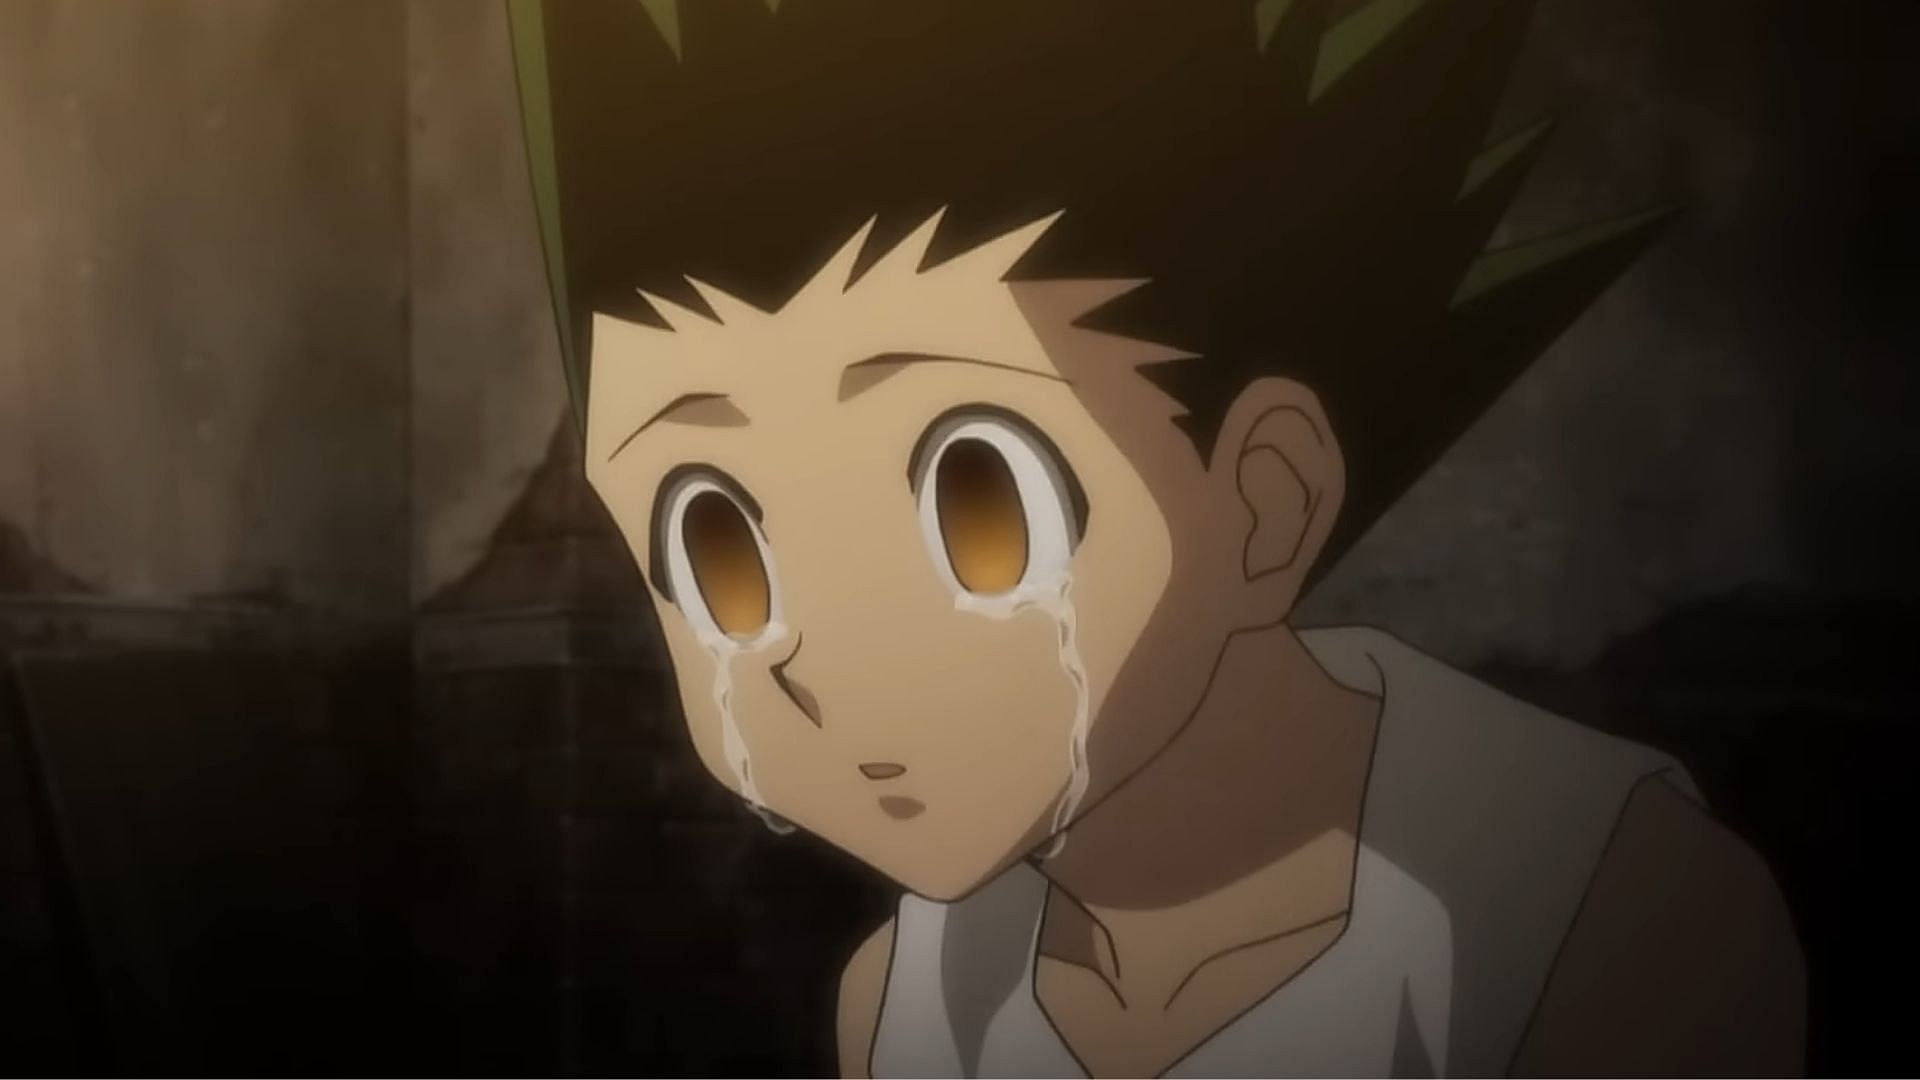 Gon as seen in Hunter x Hunter (Image via Madhouse)